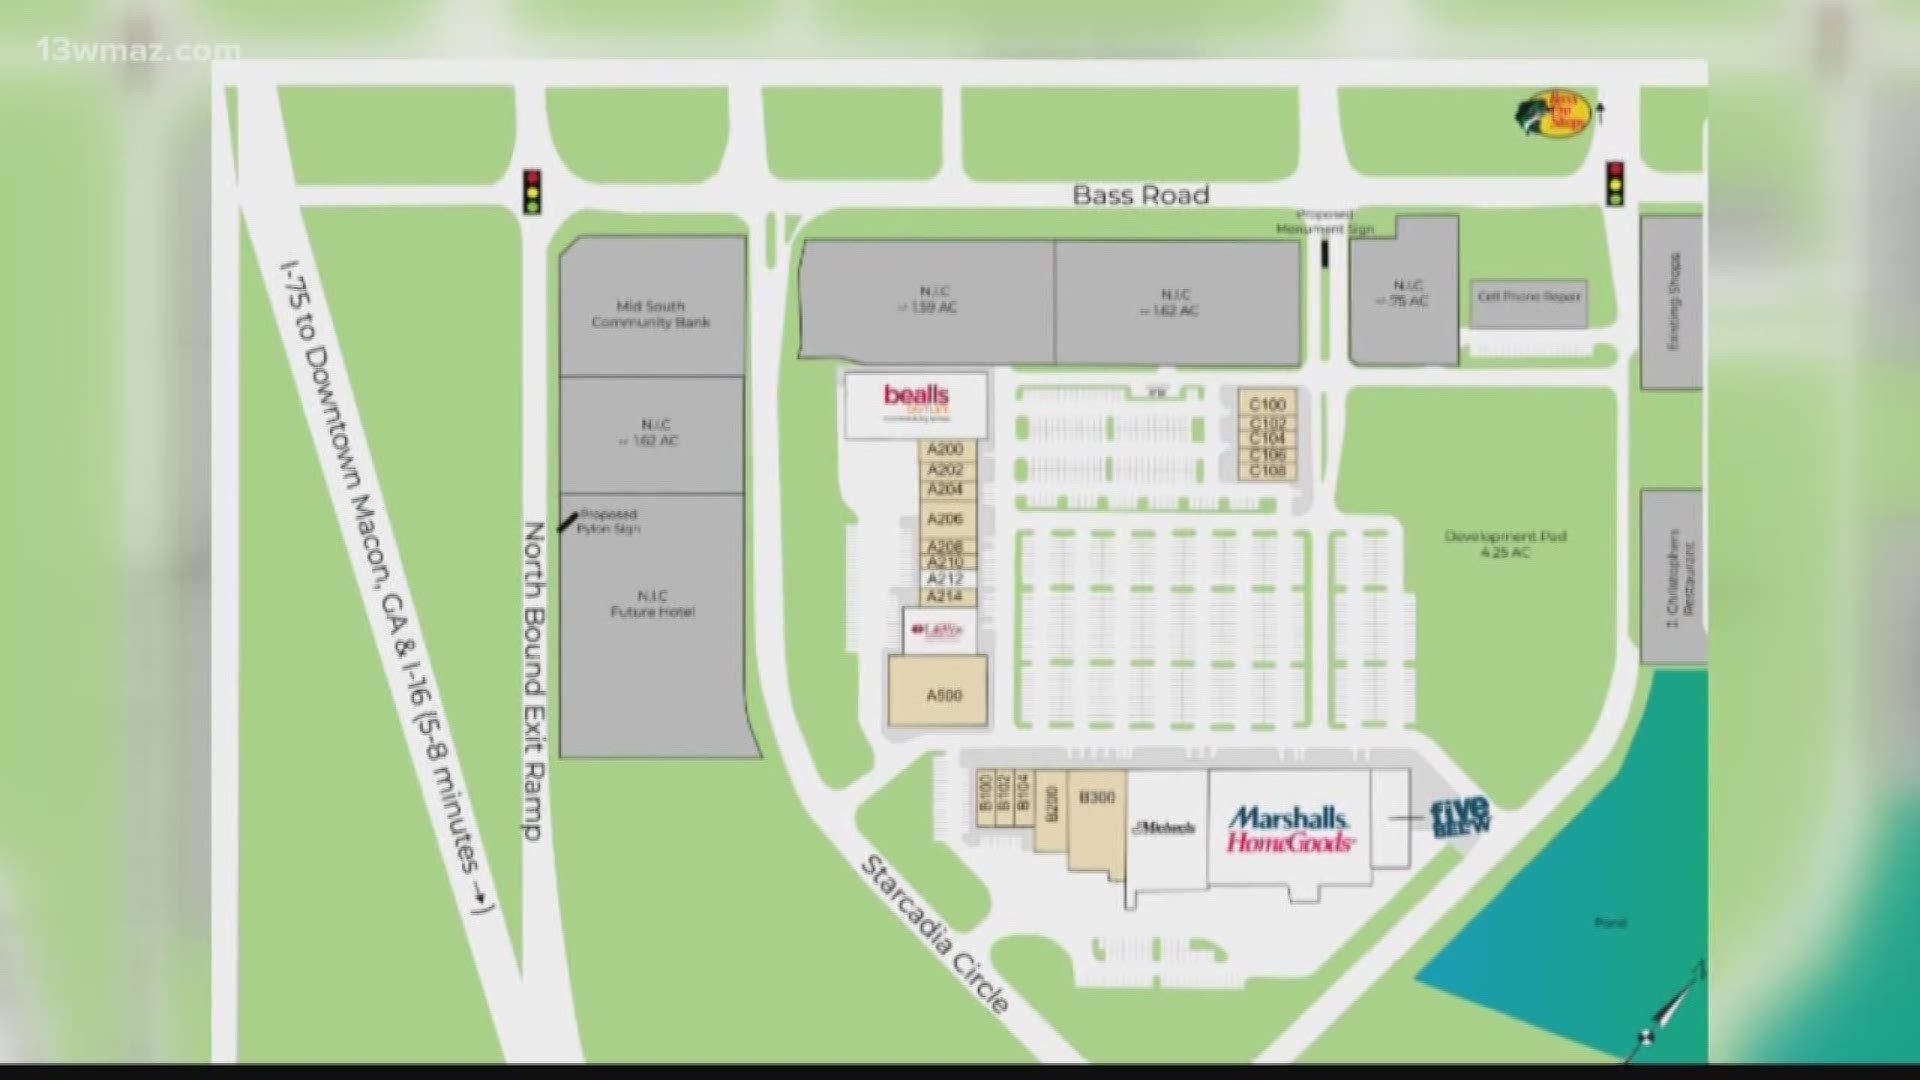 How a new shopping center could impact traffic